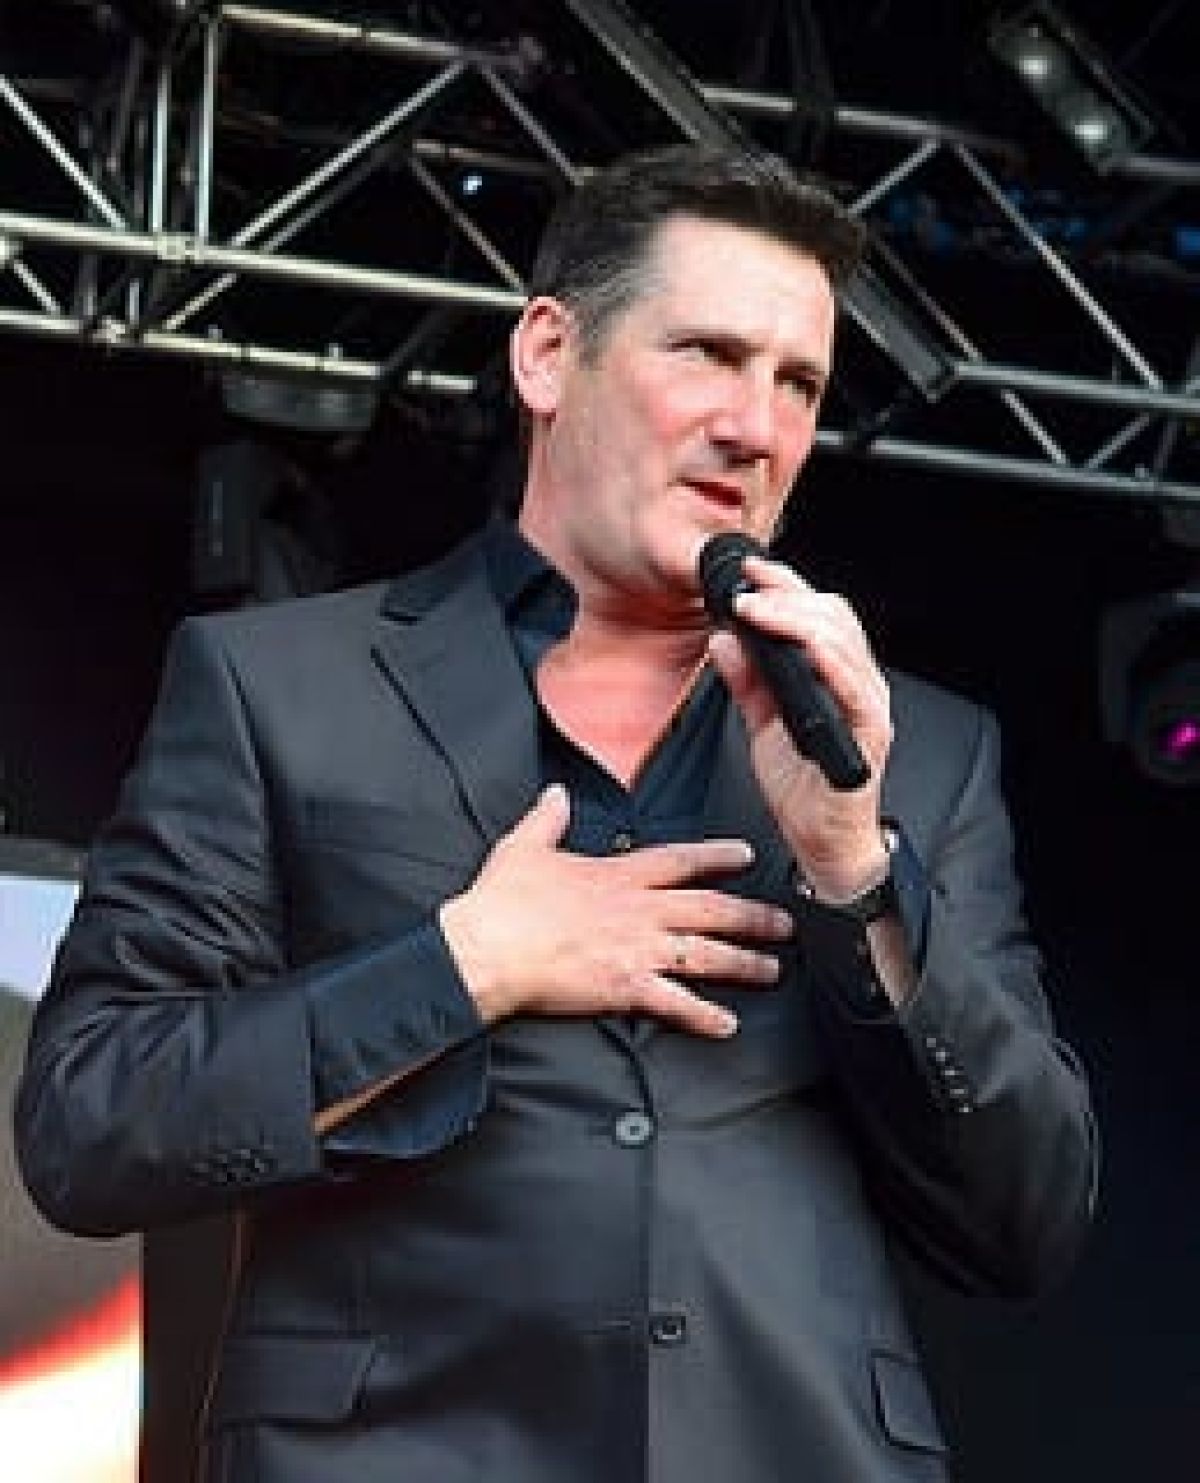 Live Review: Tony Hadley, A Night at the Opera (House)